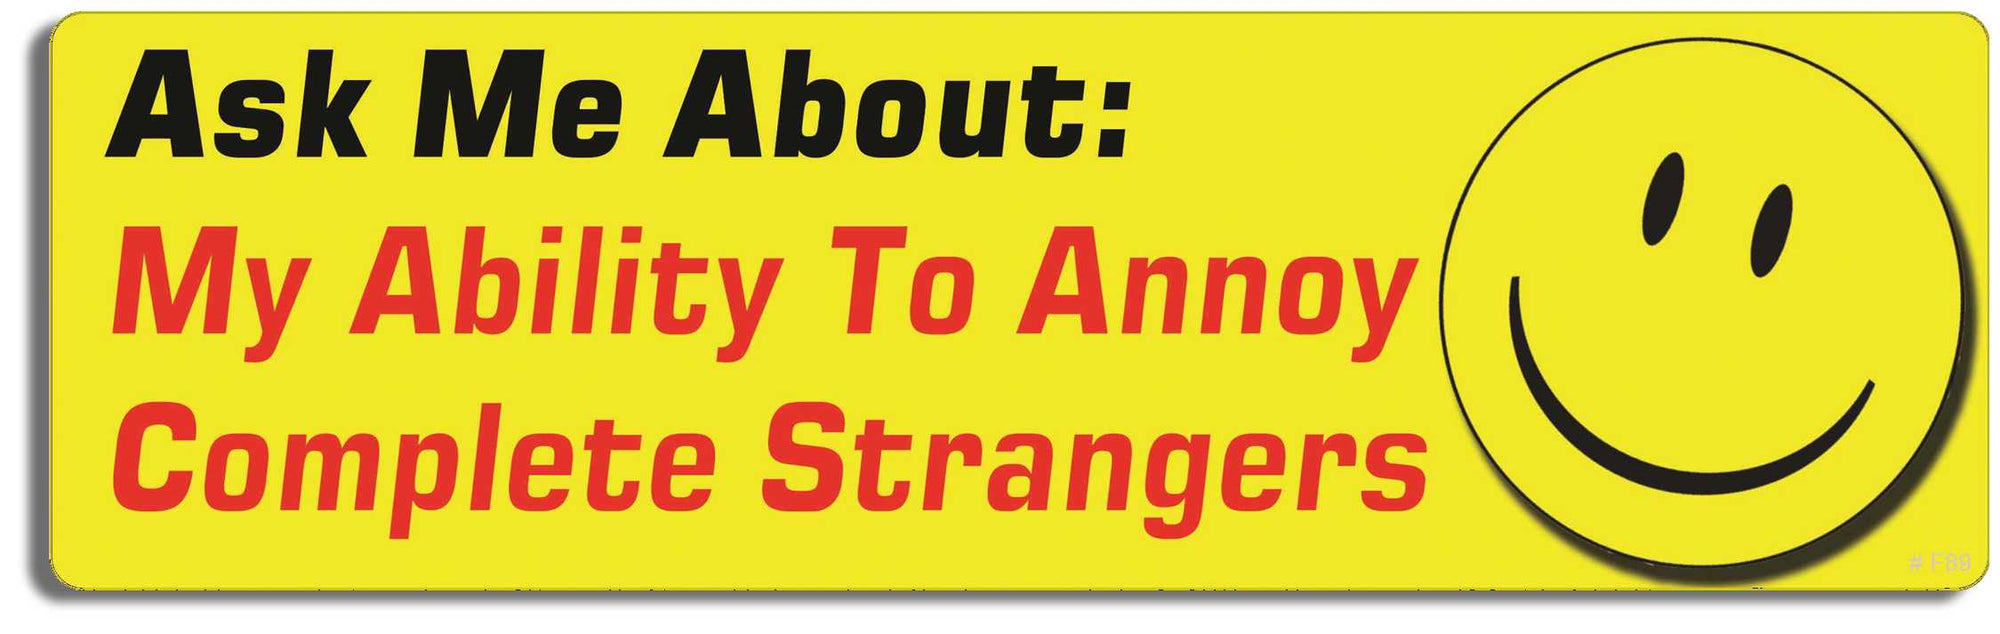 Ask me about: my ability to annoy complete strangers - 3" X 10" Bumper Sticker--Car Magnet- -  Decal Bumper Sticker-funny Bumper Sticker Car Magnet Ask me about: my ability to annoy-  Decal for cars funny, funny quote, funny saying